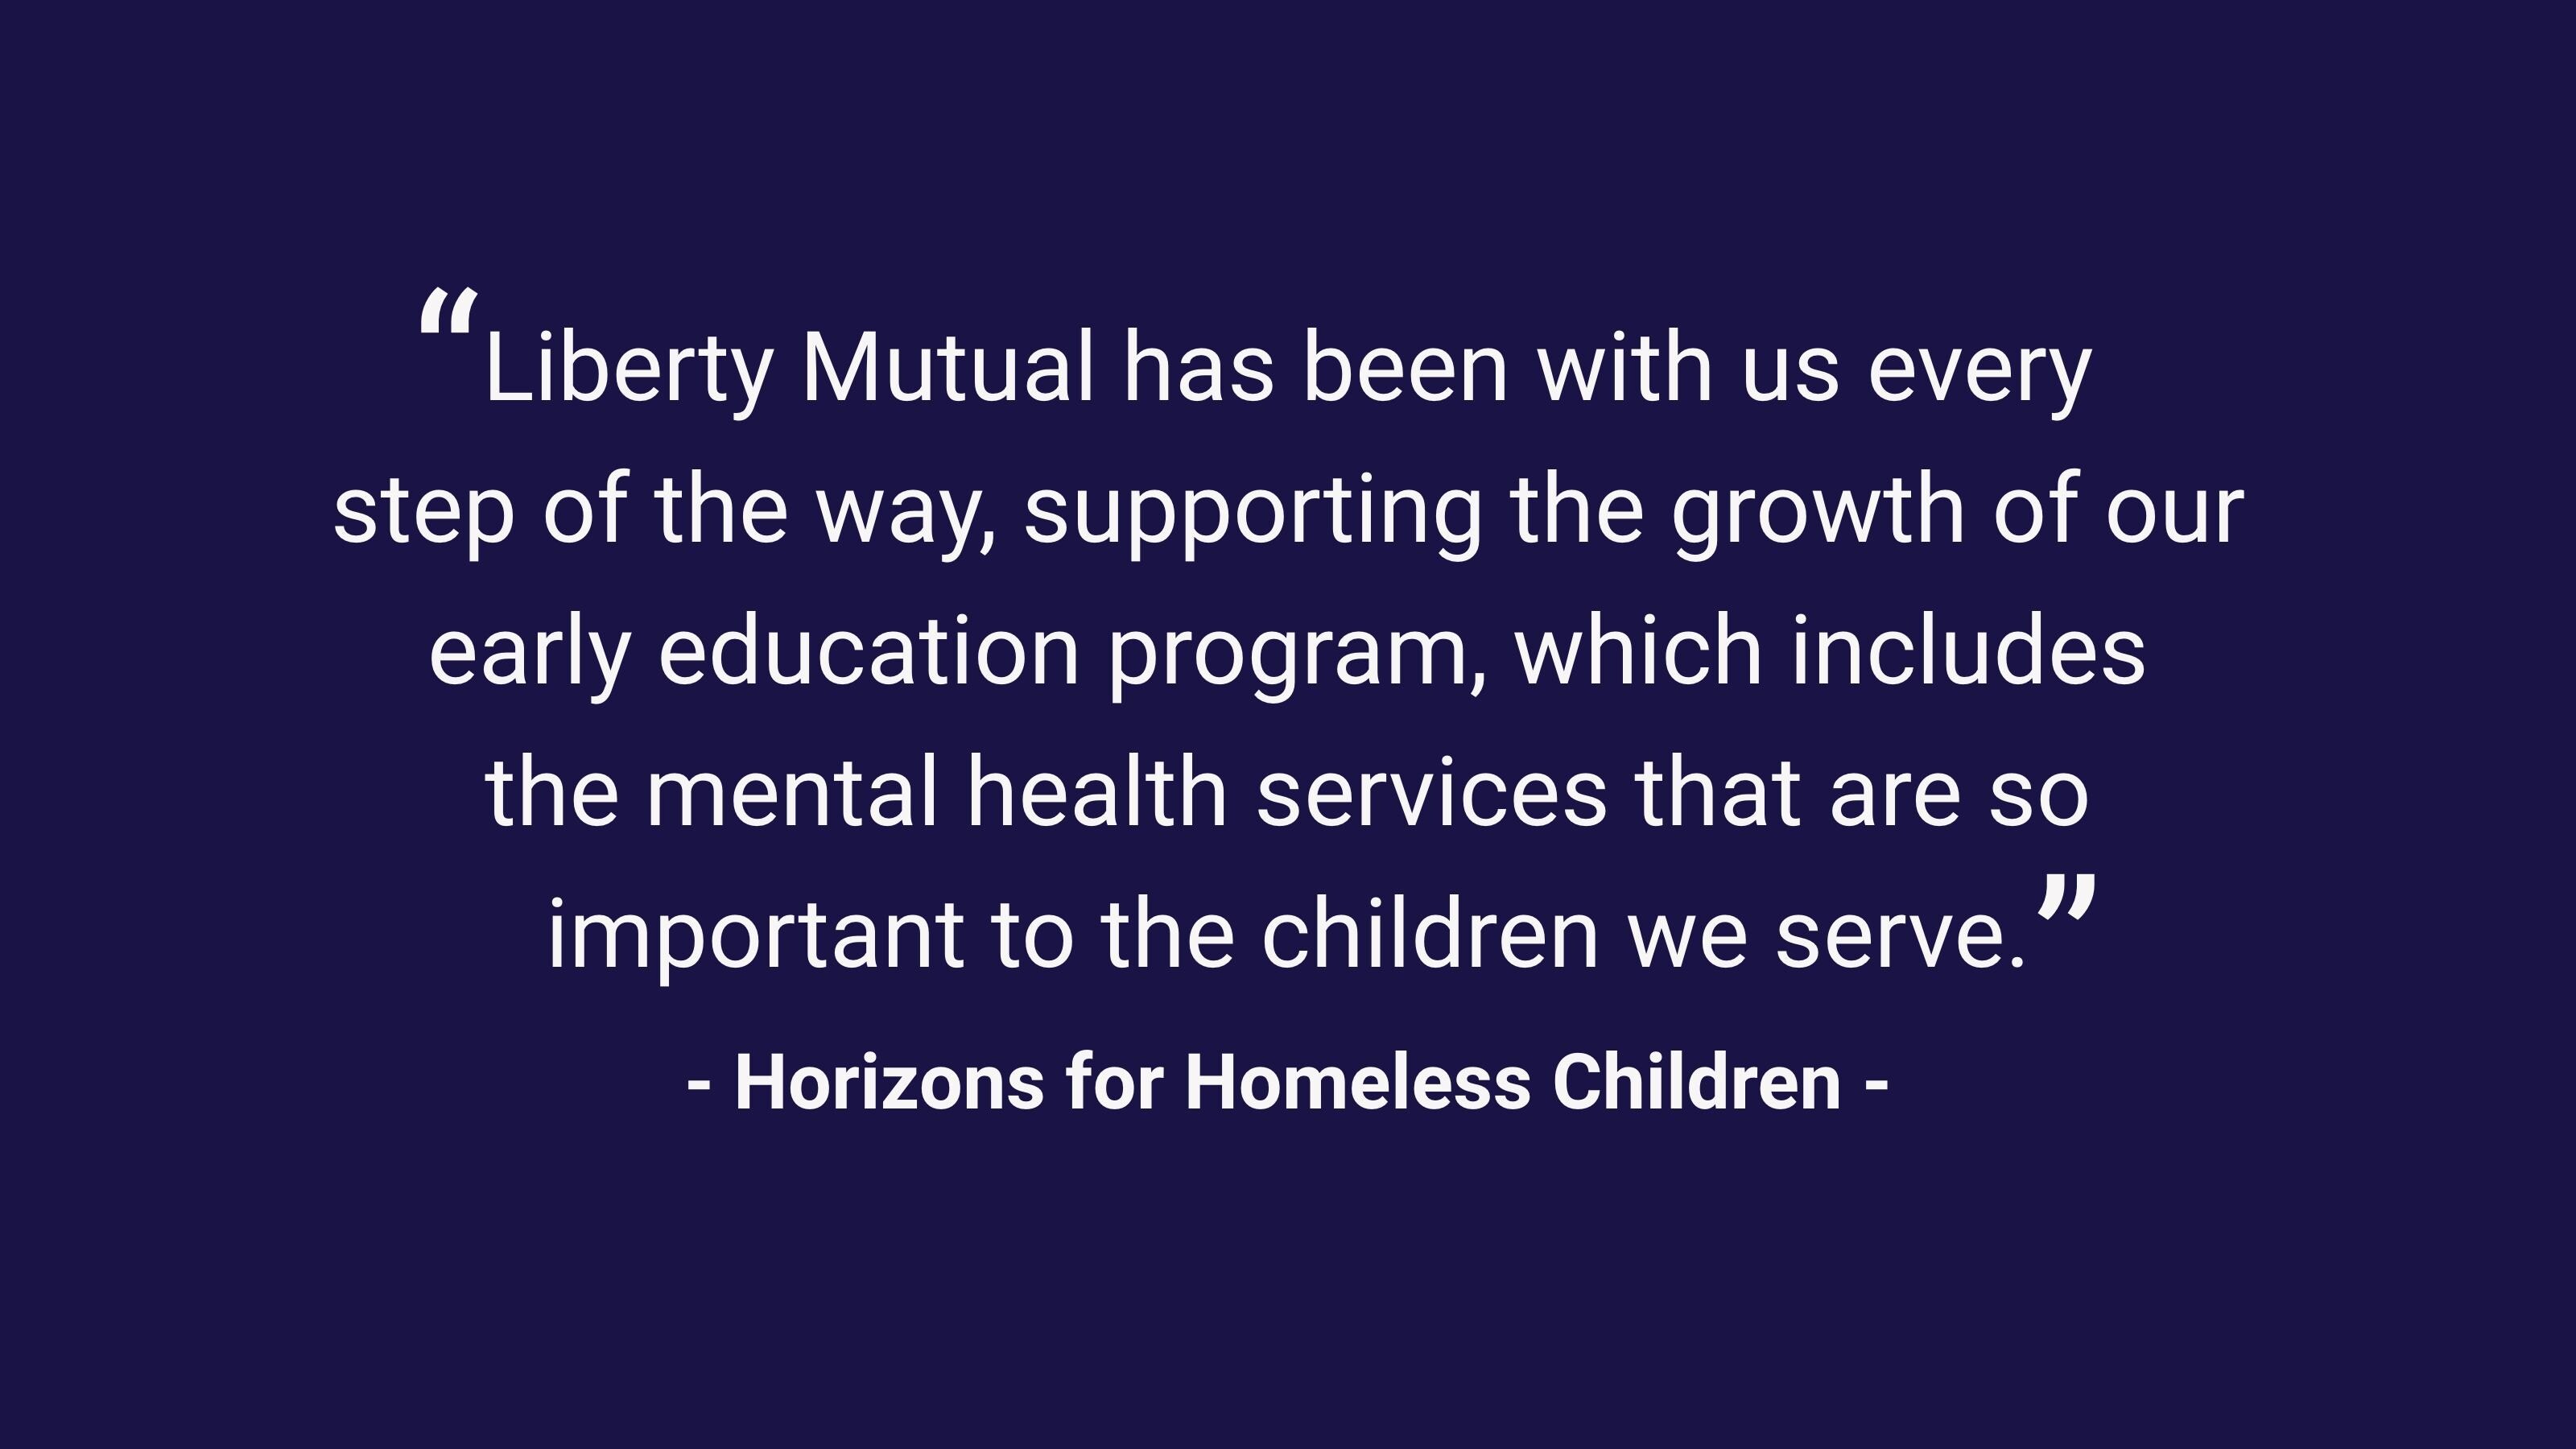 (slide 1 of 3) "Liberty Mutual has been with us every step of the way, supporting the growth of our early education program, which includes the mental health services that are so important to the children we serve." Horizons for Homeless Children. 